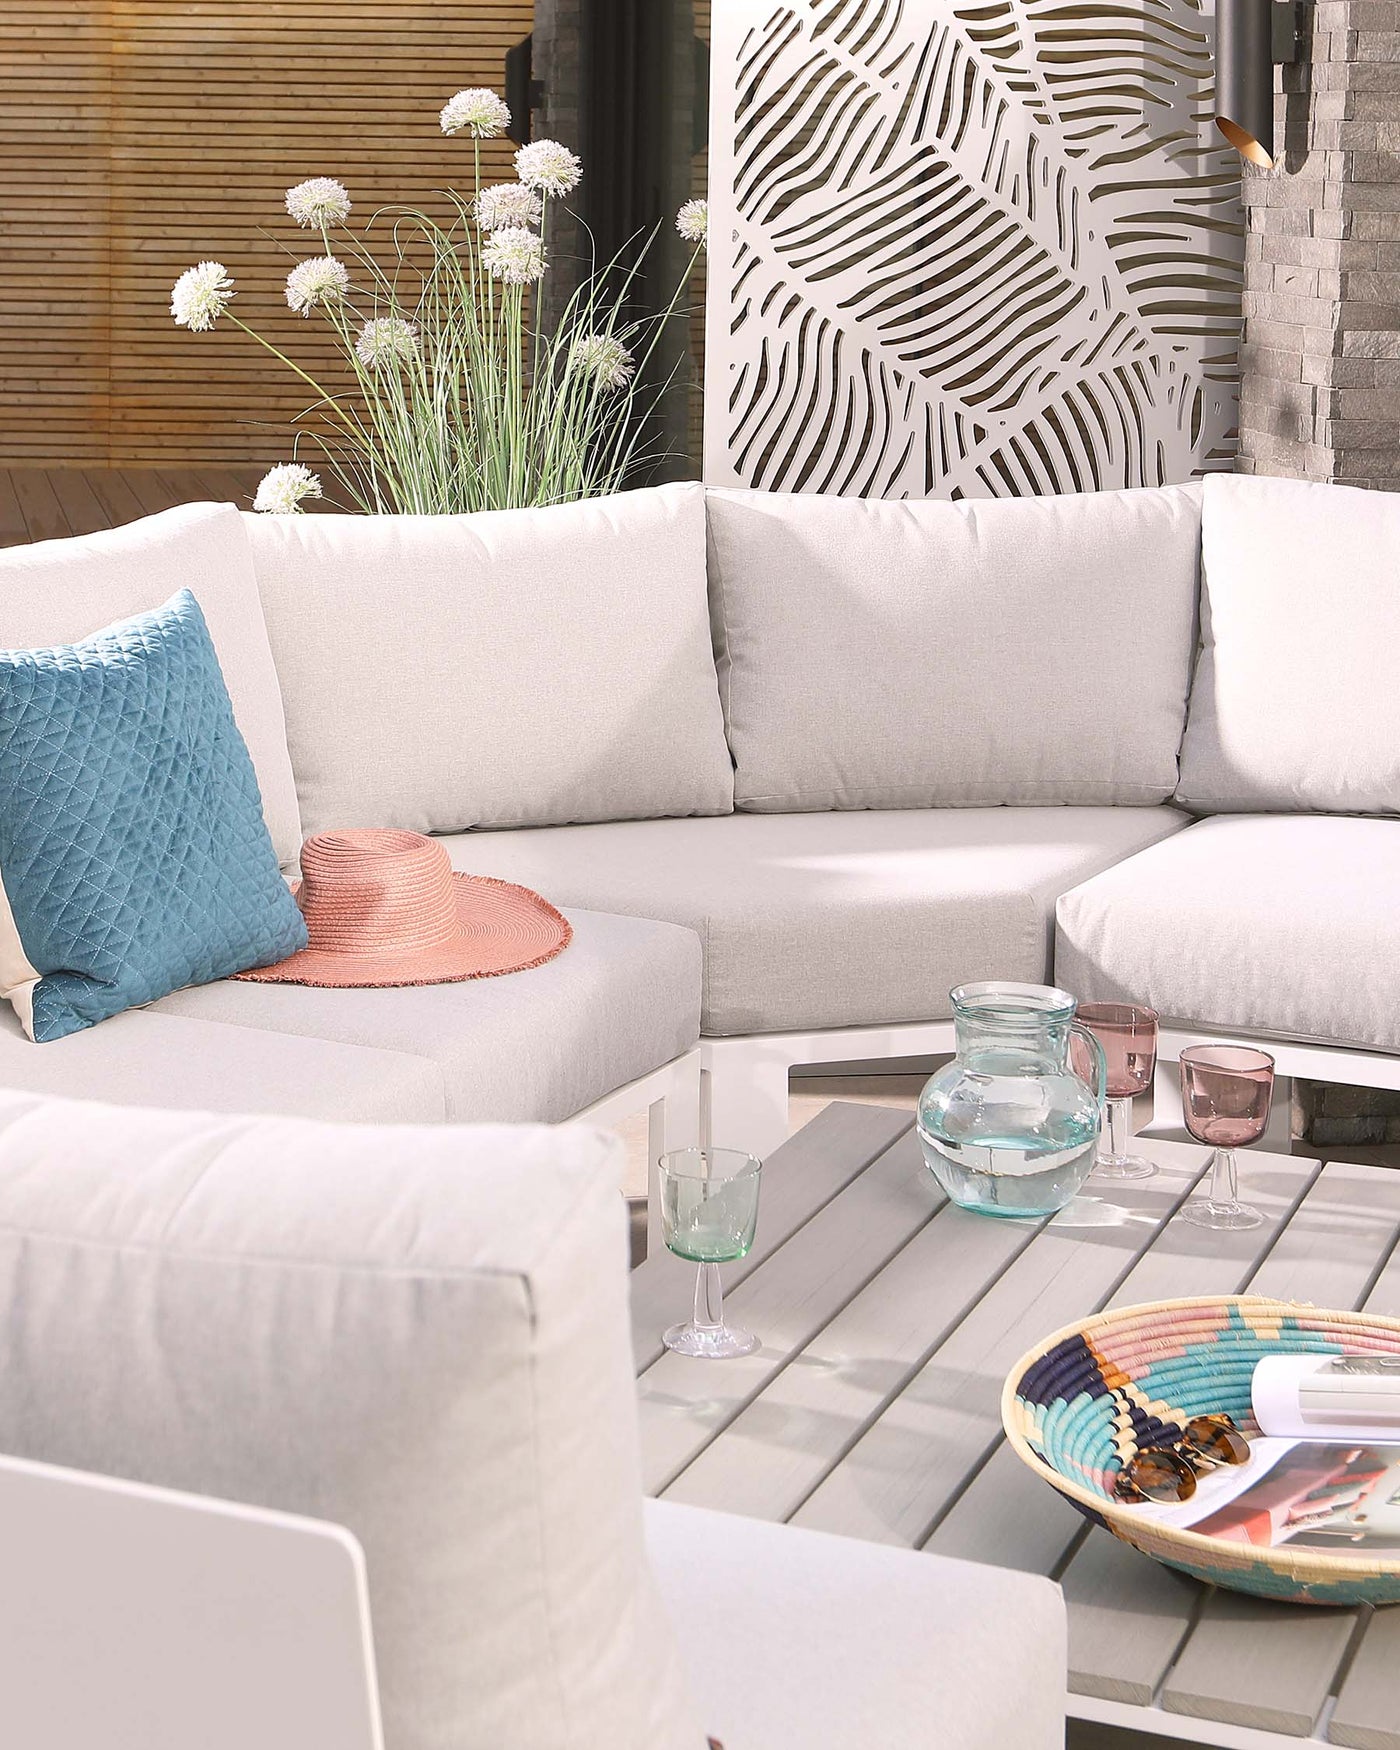 Modern outdoor corner sectional sofa in light grey with clean lines and plush cushions accompanied by a low-profile, slatted coffee table in a coordinating grey tone. Decorative pillows in varying hues of blue and pink add a pop of colour.